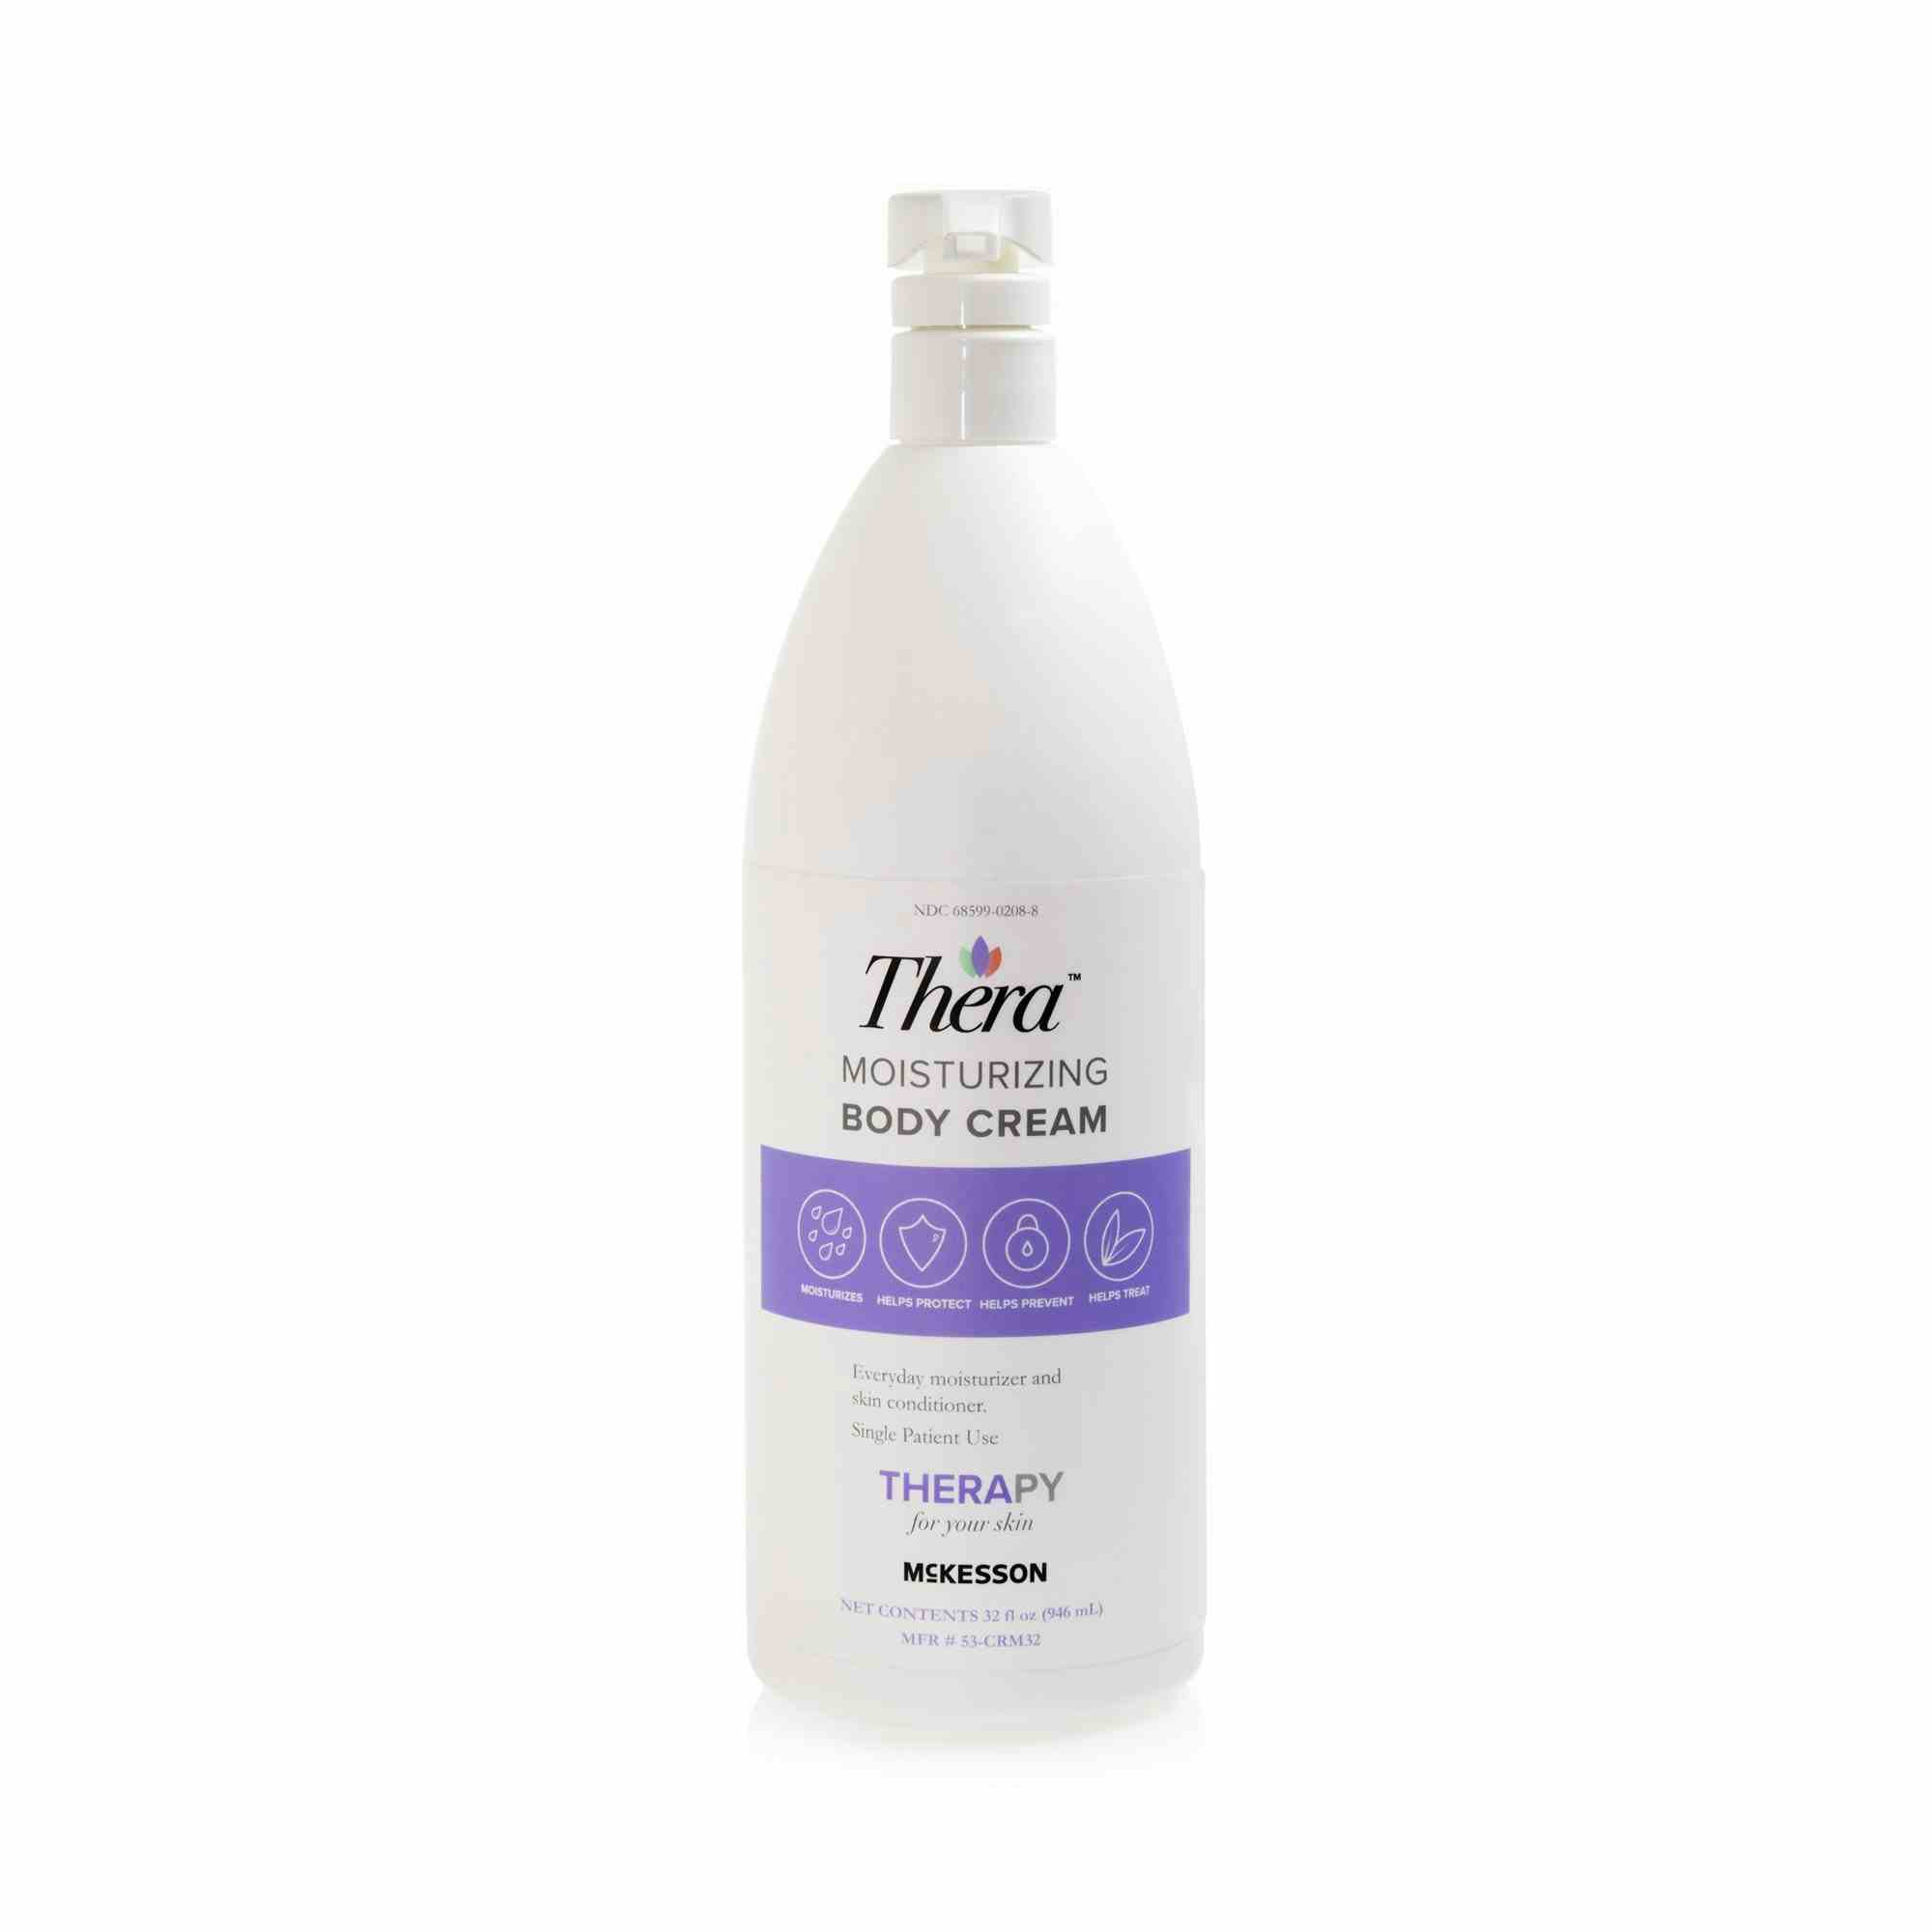 Thera Hand and Body Moisturizer Cream, Pump Bottle, Scented, 32 oz., 53-CRM32, 1 Bottle